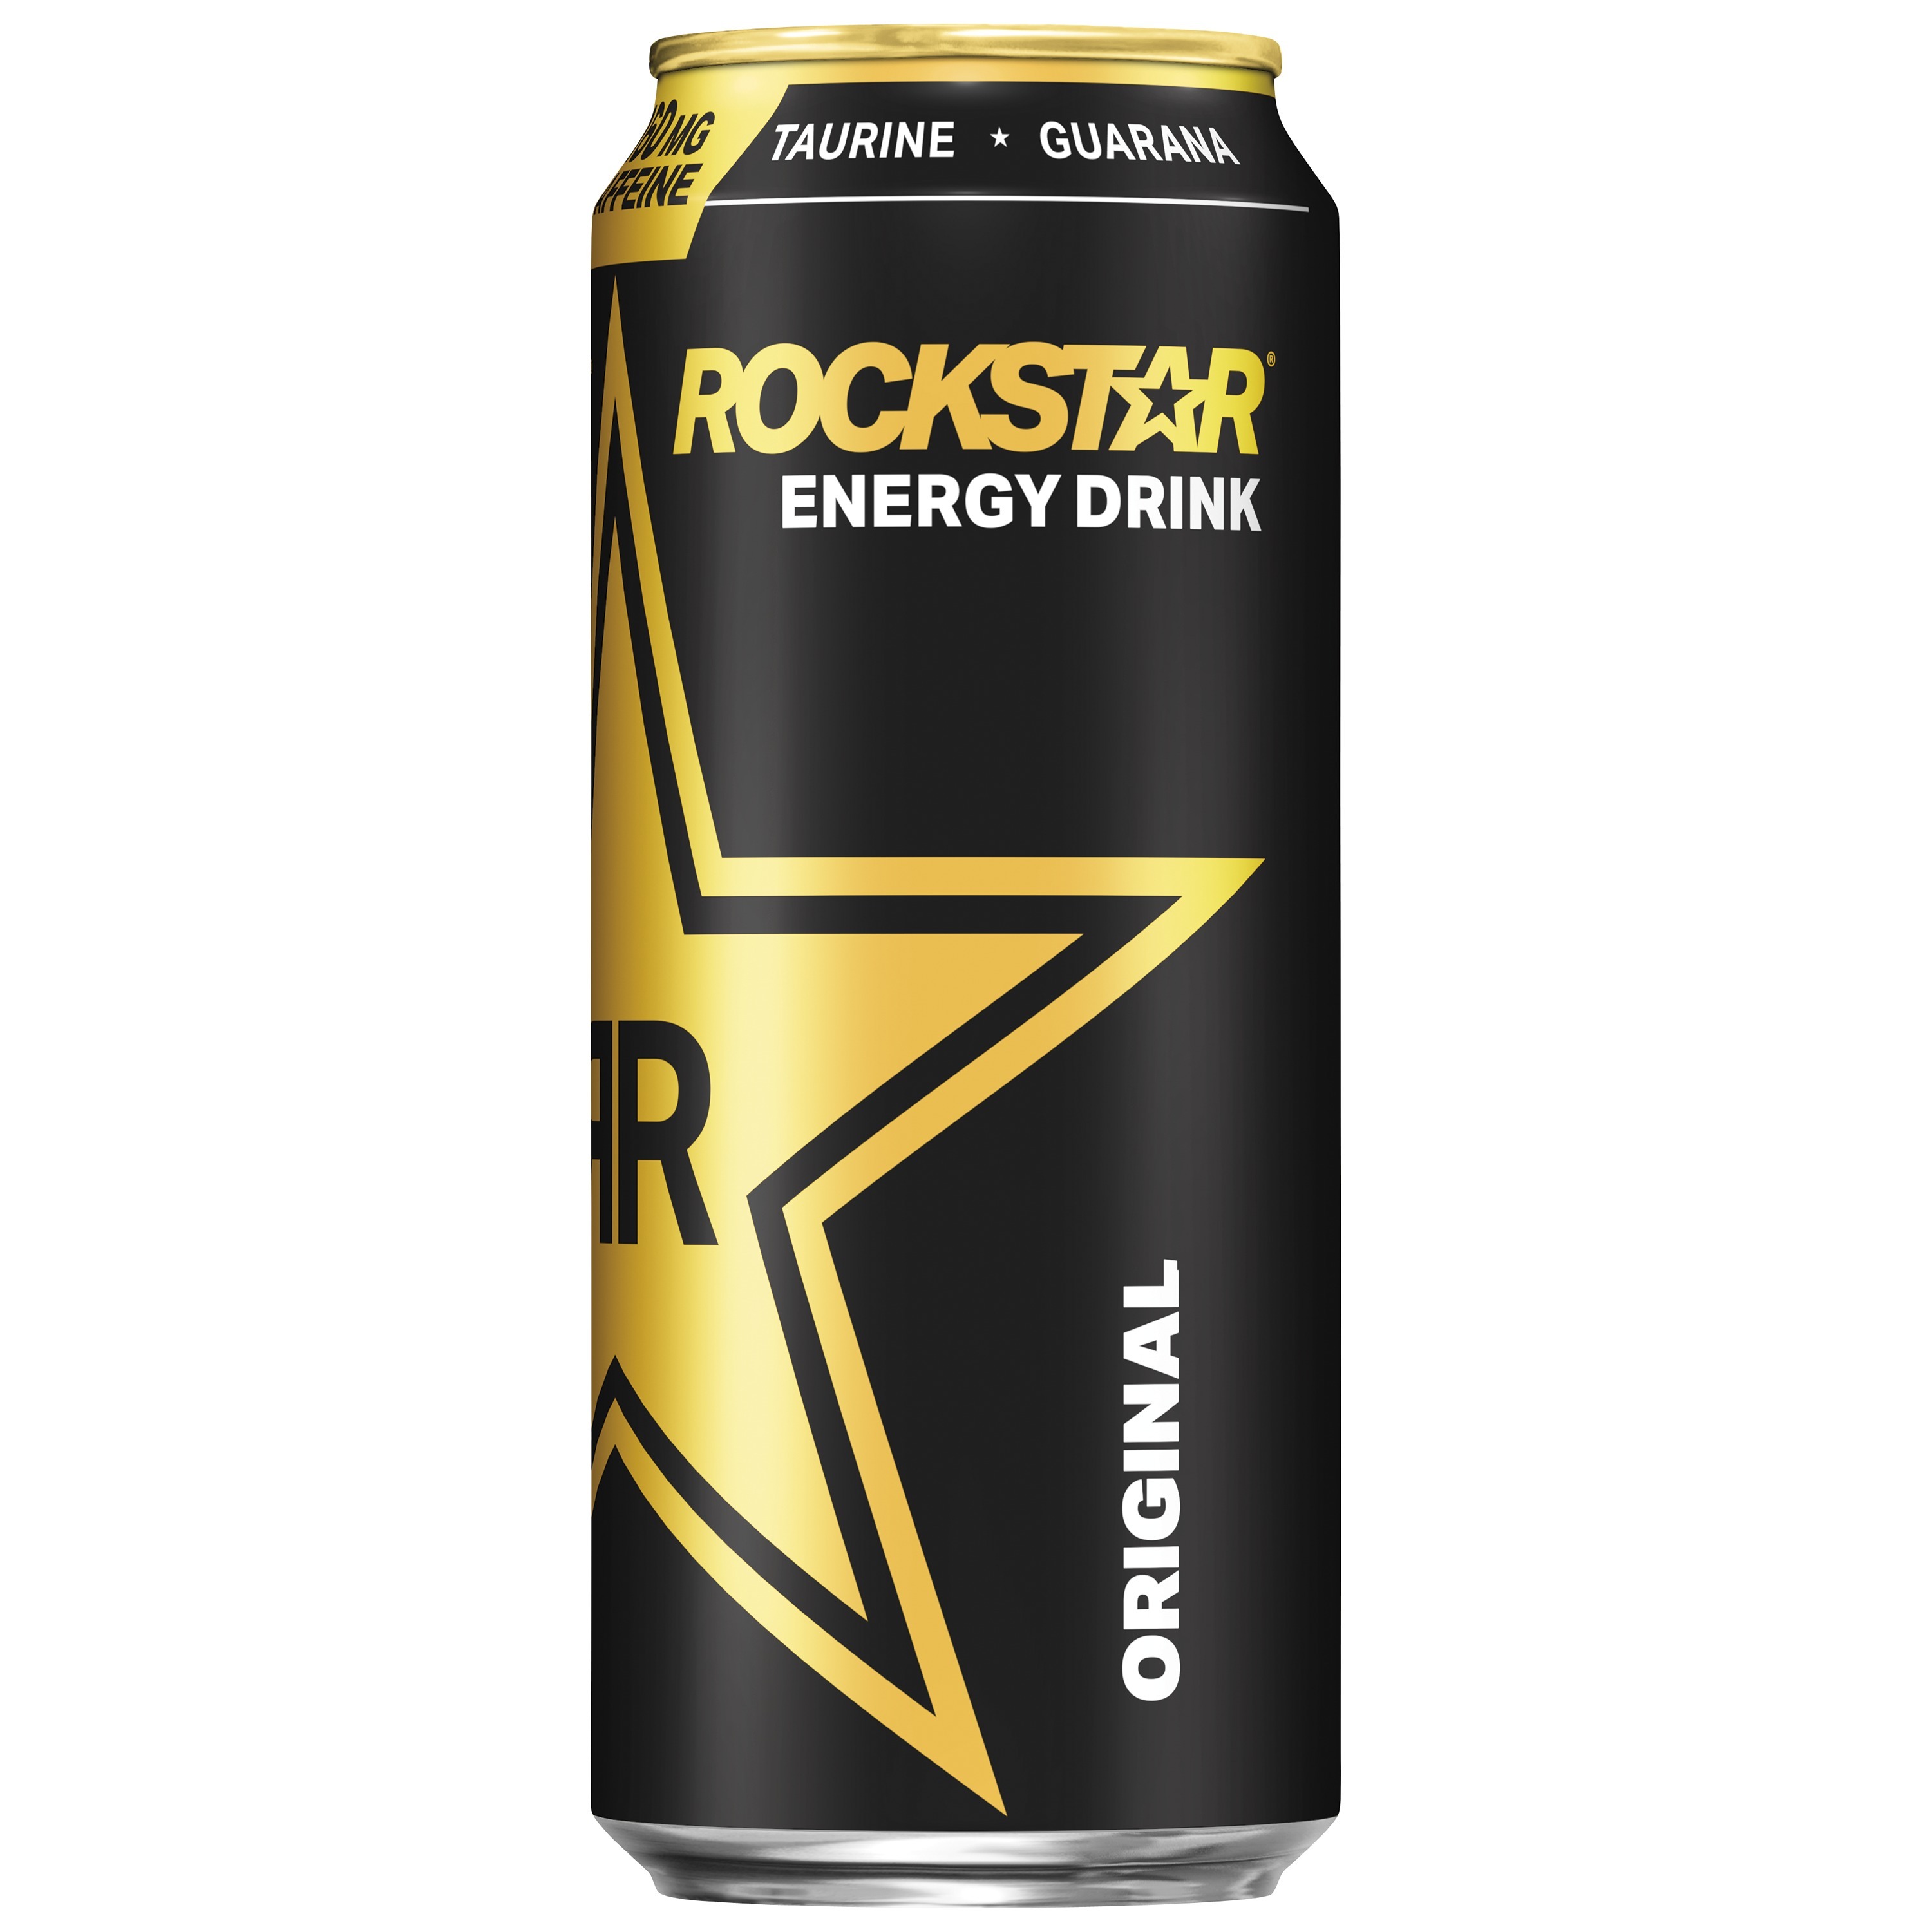 Calaméo - Dial Rockstar Customer Service @ 1-888-985-8273 Number toll-free  to get instant Support for Rockstar Games